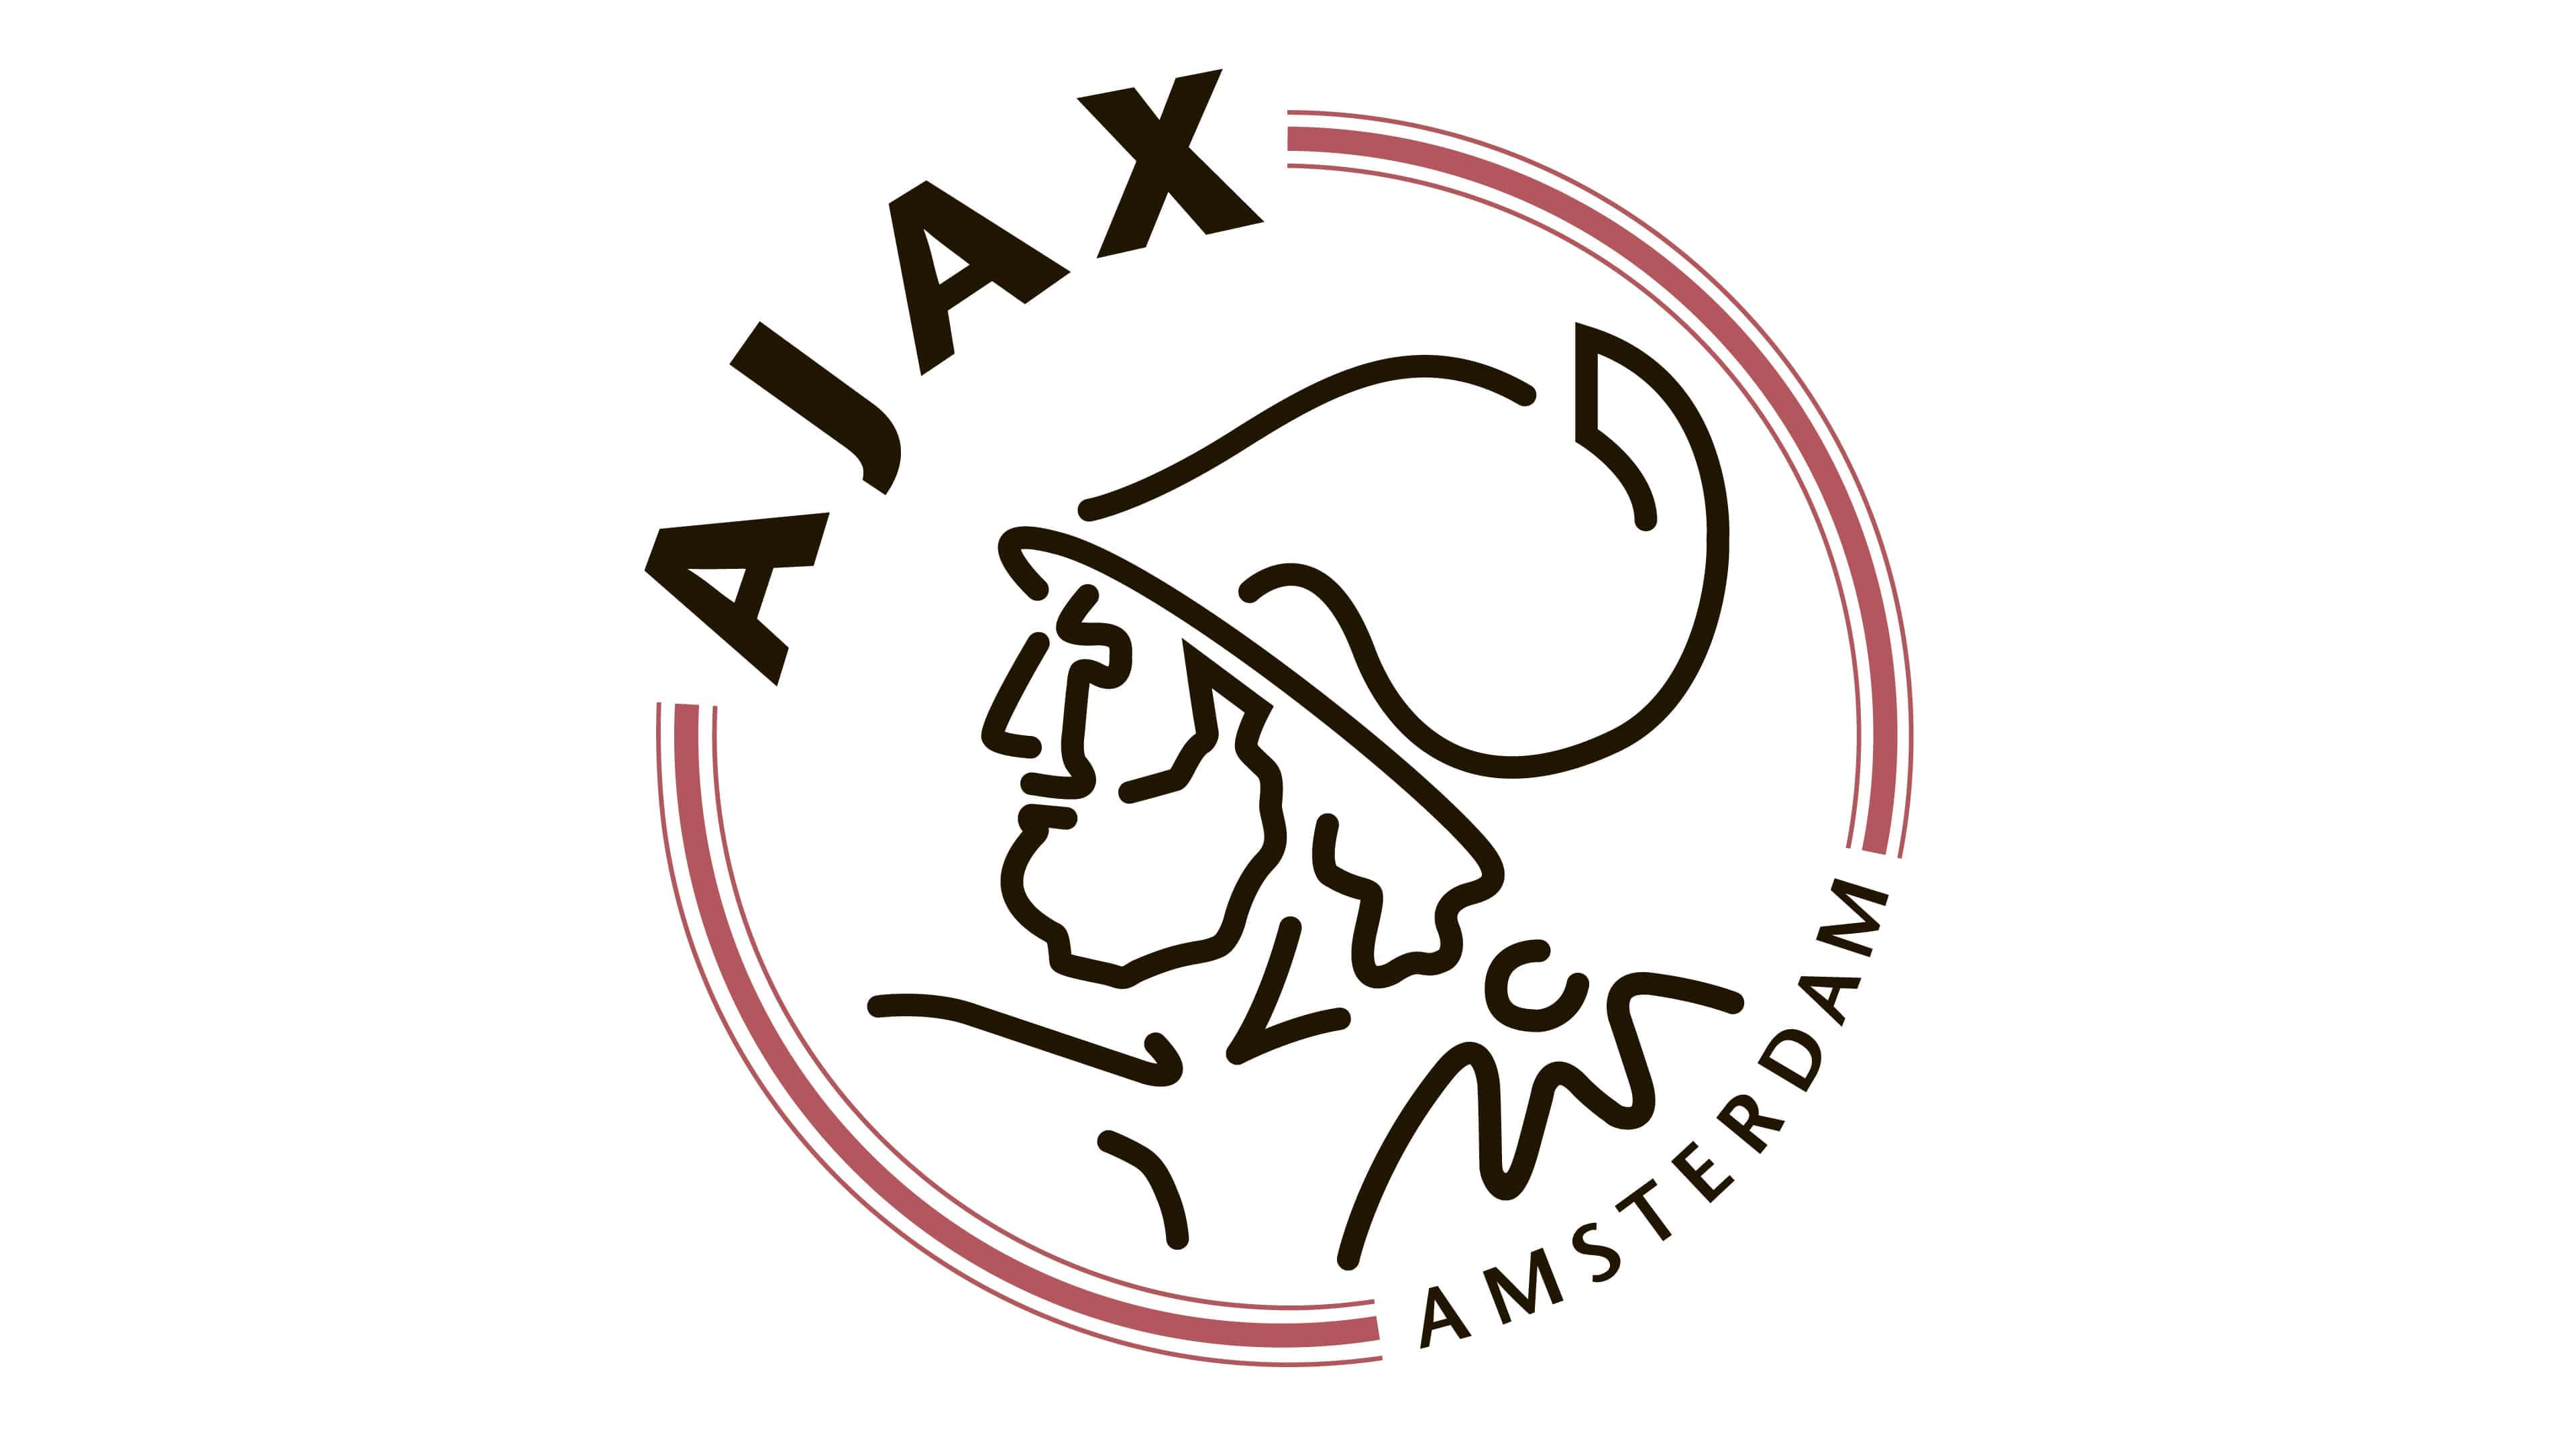 Ajax Logo The Most Famous Brands And Company Logos In The World